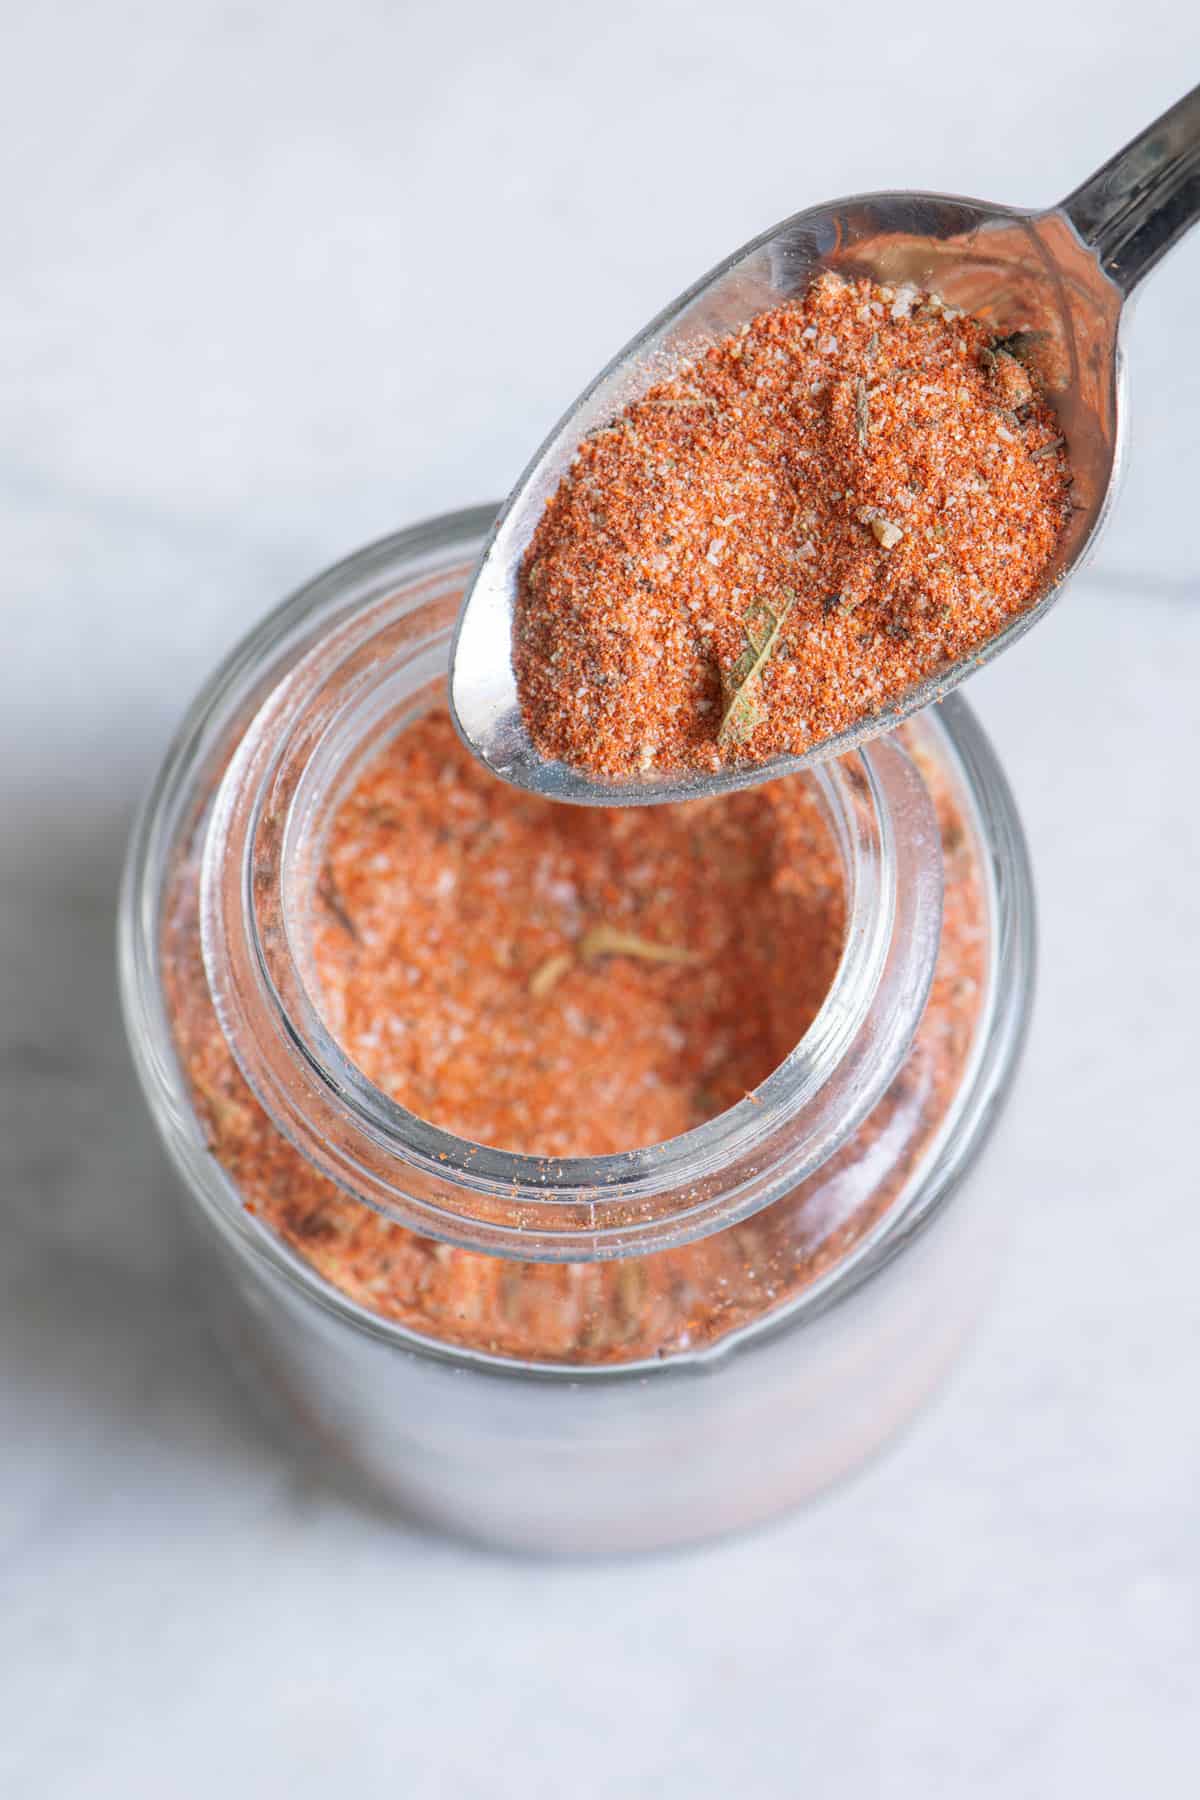 Top down shot of a spoon with Cajun seasoning and a jar of the seasoning underneath.